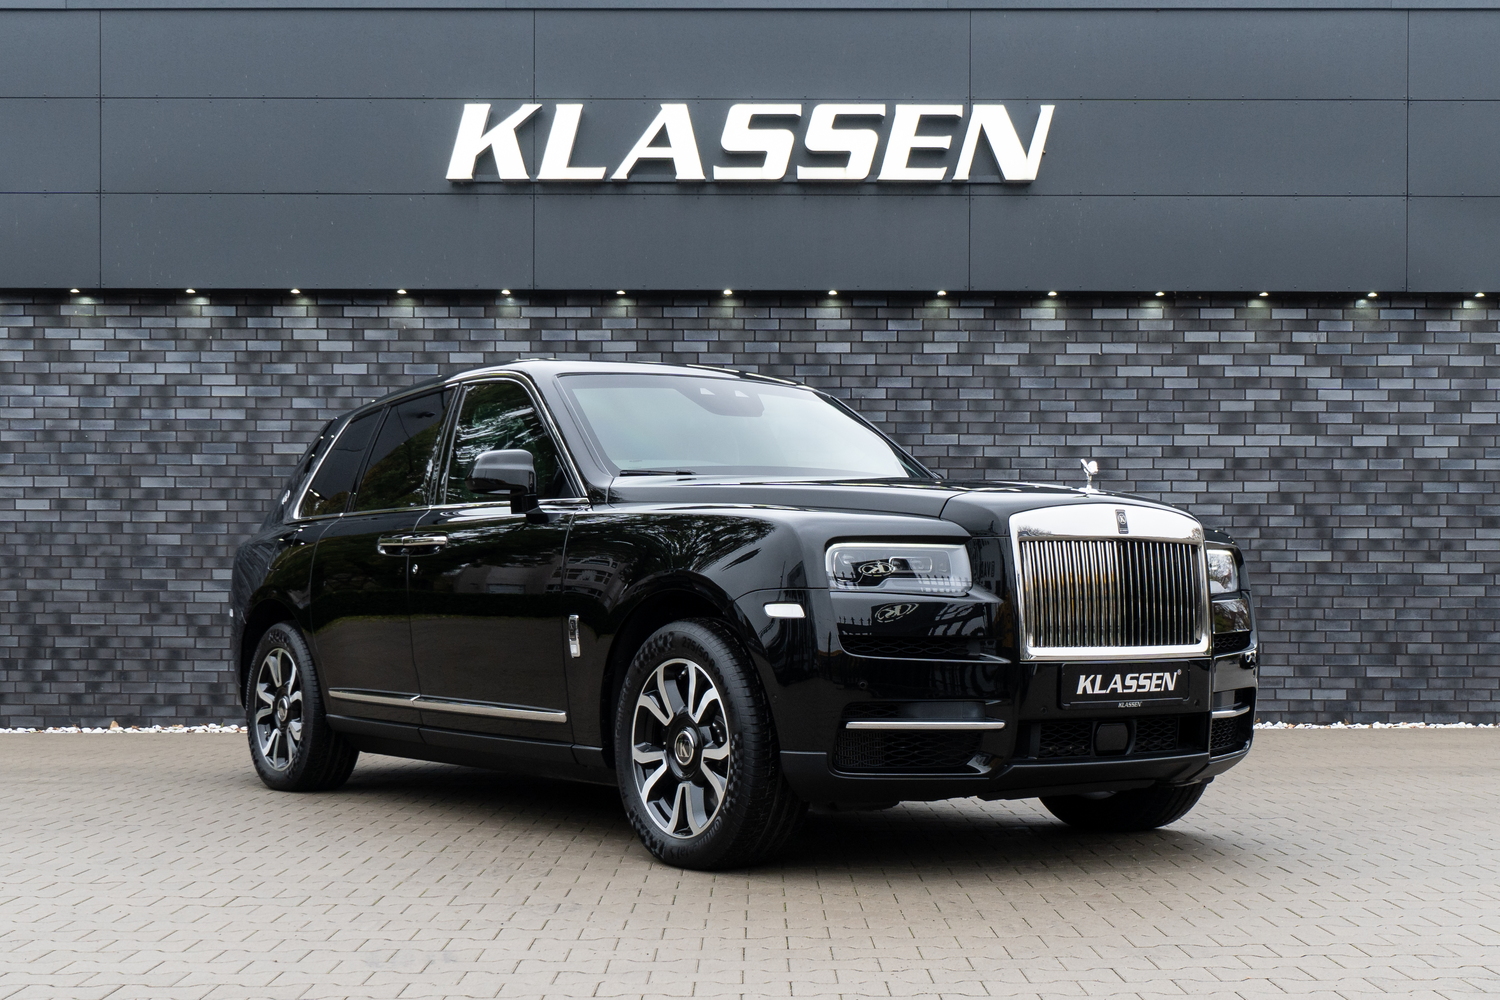 Klassen has just unveiled a new armored version of the Cullinan that comes complete with a full suite of security features to keep passengers